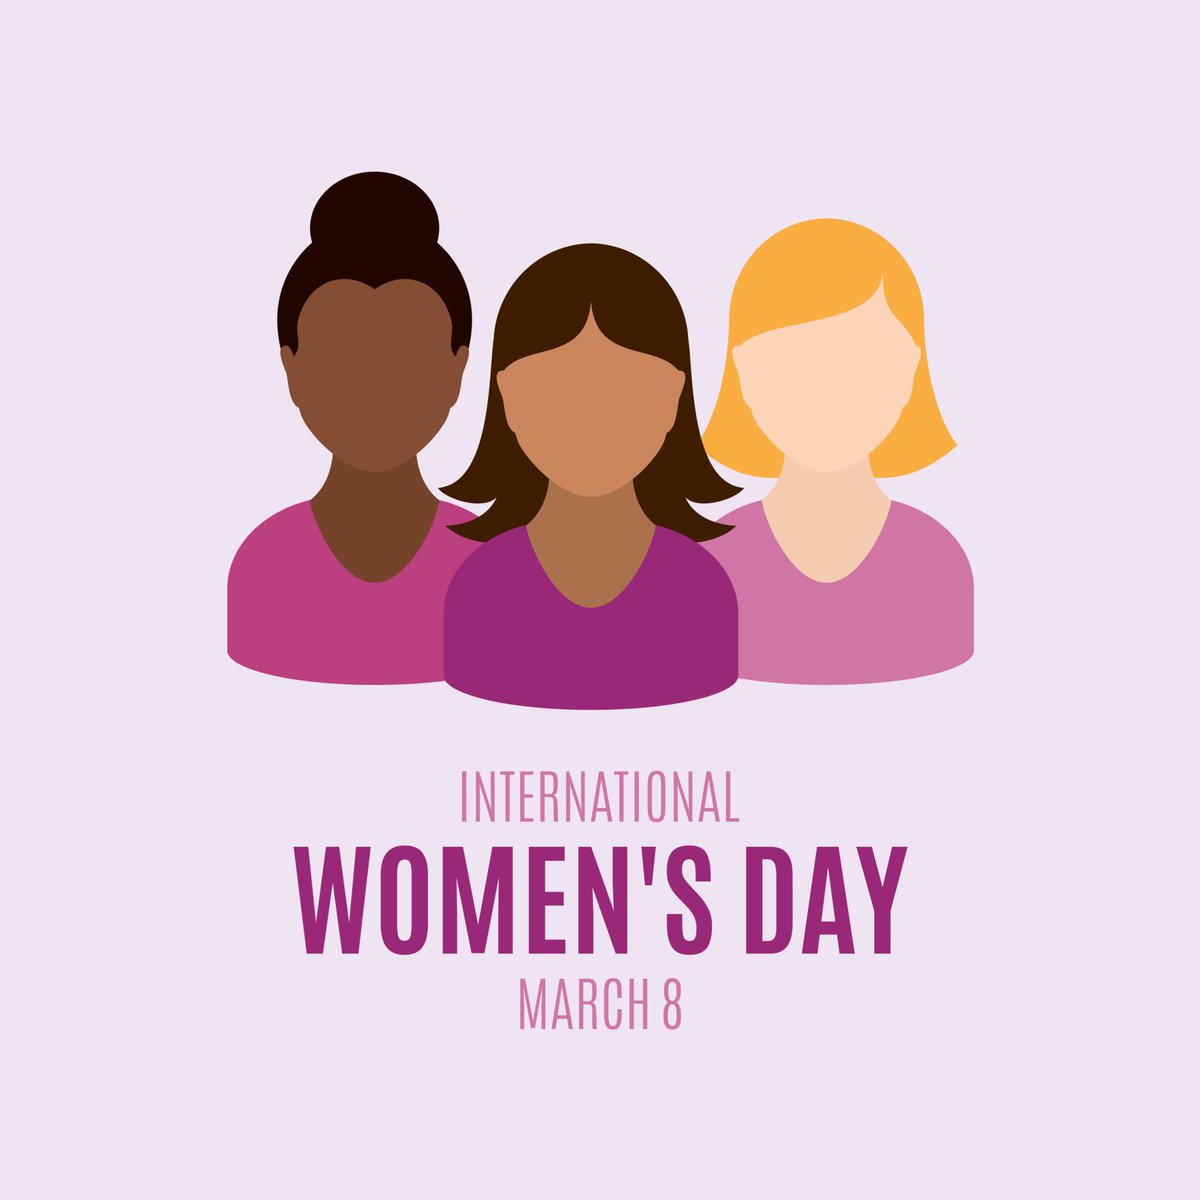 Huge shout out to all the amazing women who help to provide support, care and nurturing to the children in our care. You do an amazing job on a daily basis. #InternationalWomensDay #care #childrenarethefuture #hiddenheroes